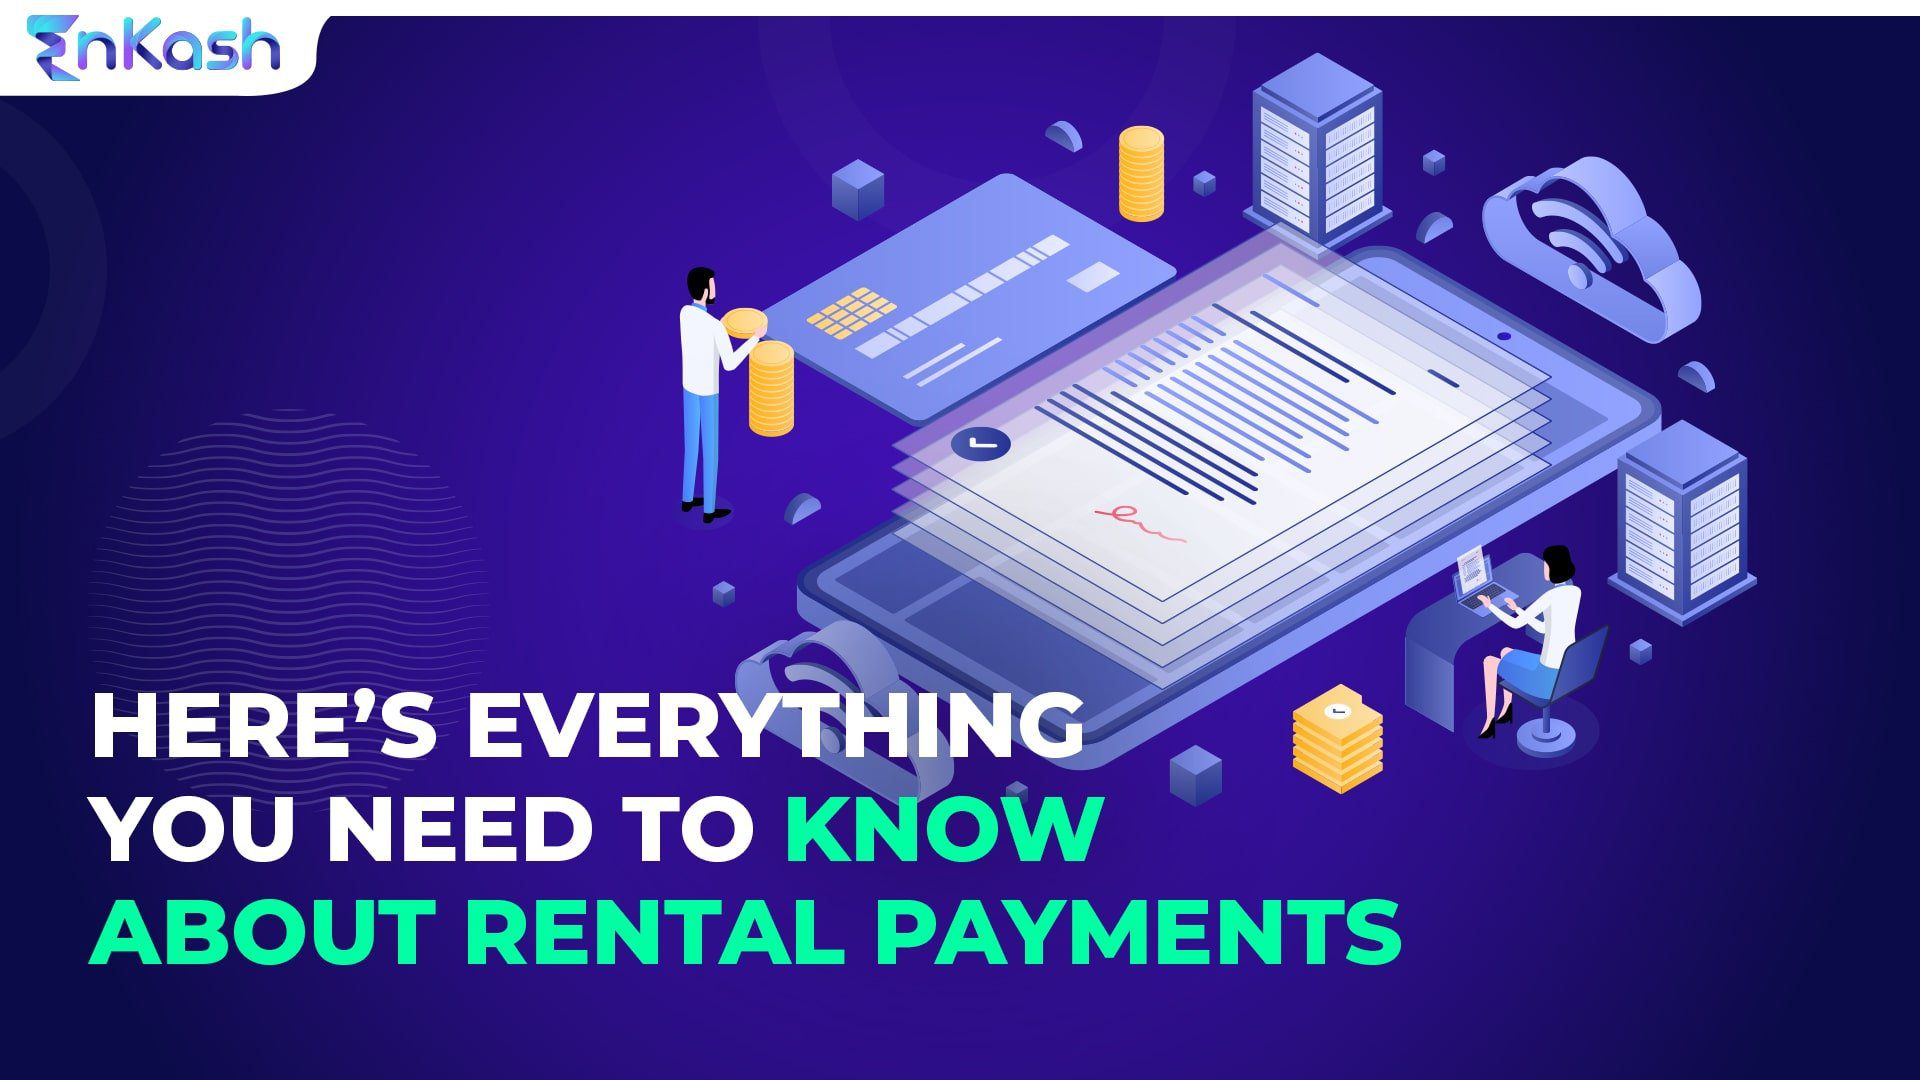 Learn about rental payment